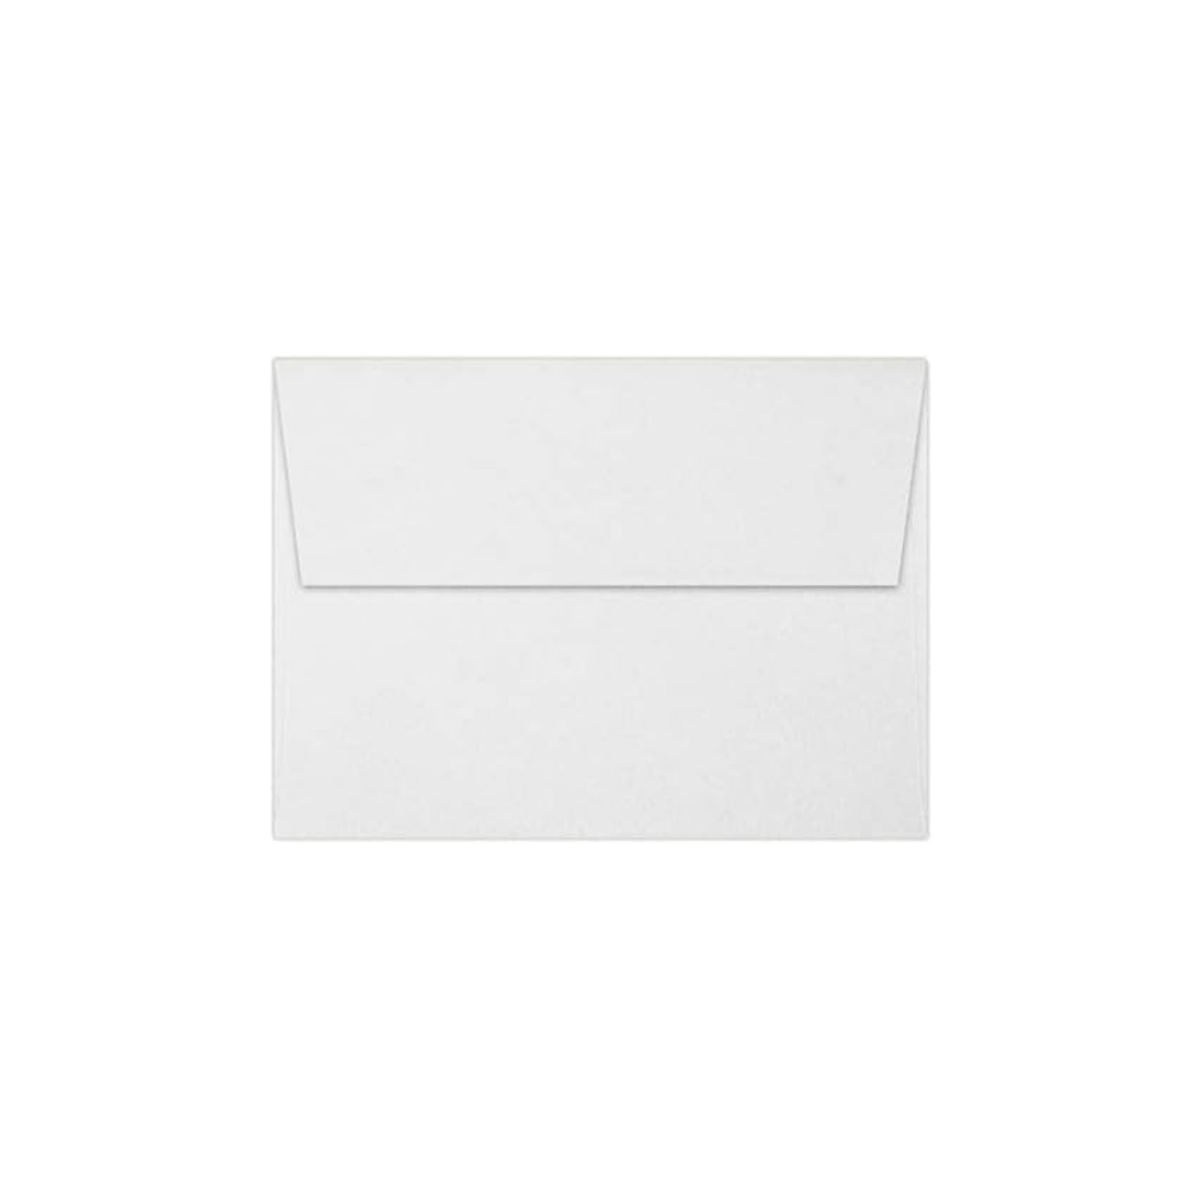 Reskid 50-Pack of Heavyweight 110lb White Blank Cards With Envelopes - 5.5" x 8.5" Folded To 4.25"x 5.5" Blank Greeting Cards And A2 Envelopes - Printable Note Cards With Envelopes (4.25x5.5, inches)